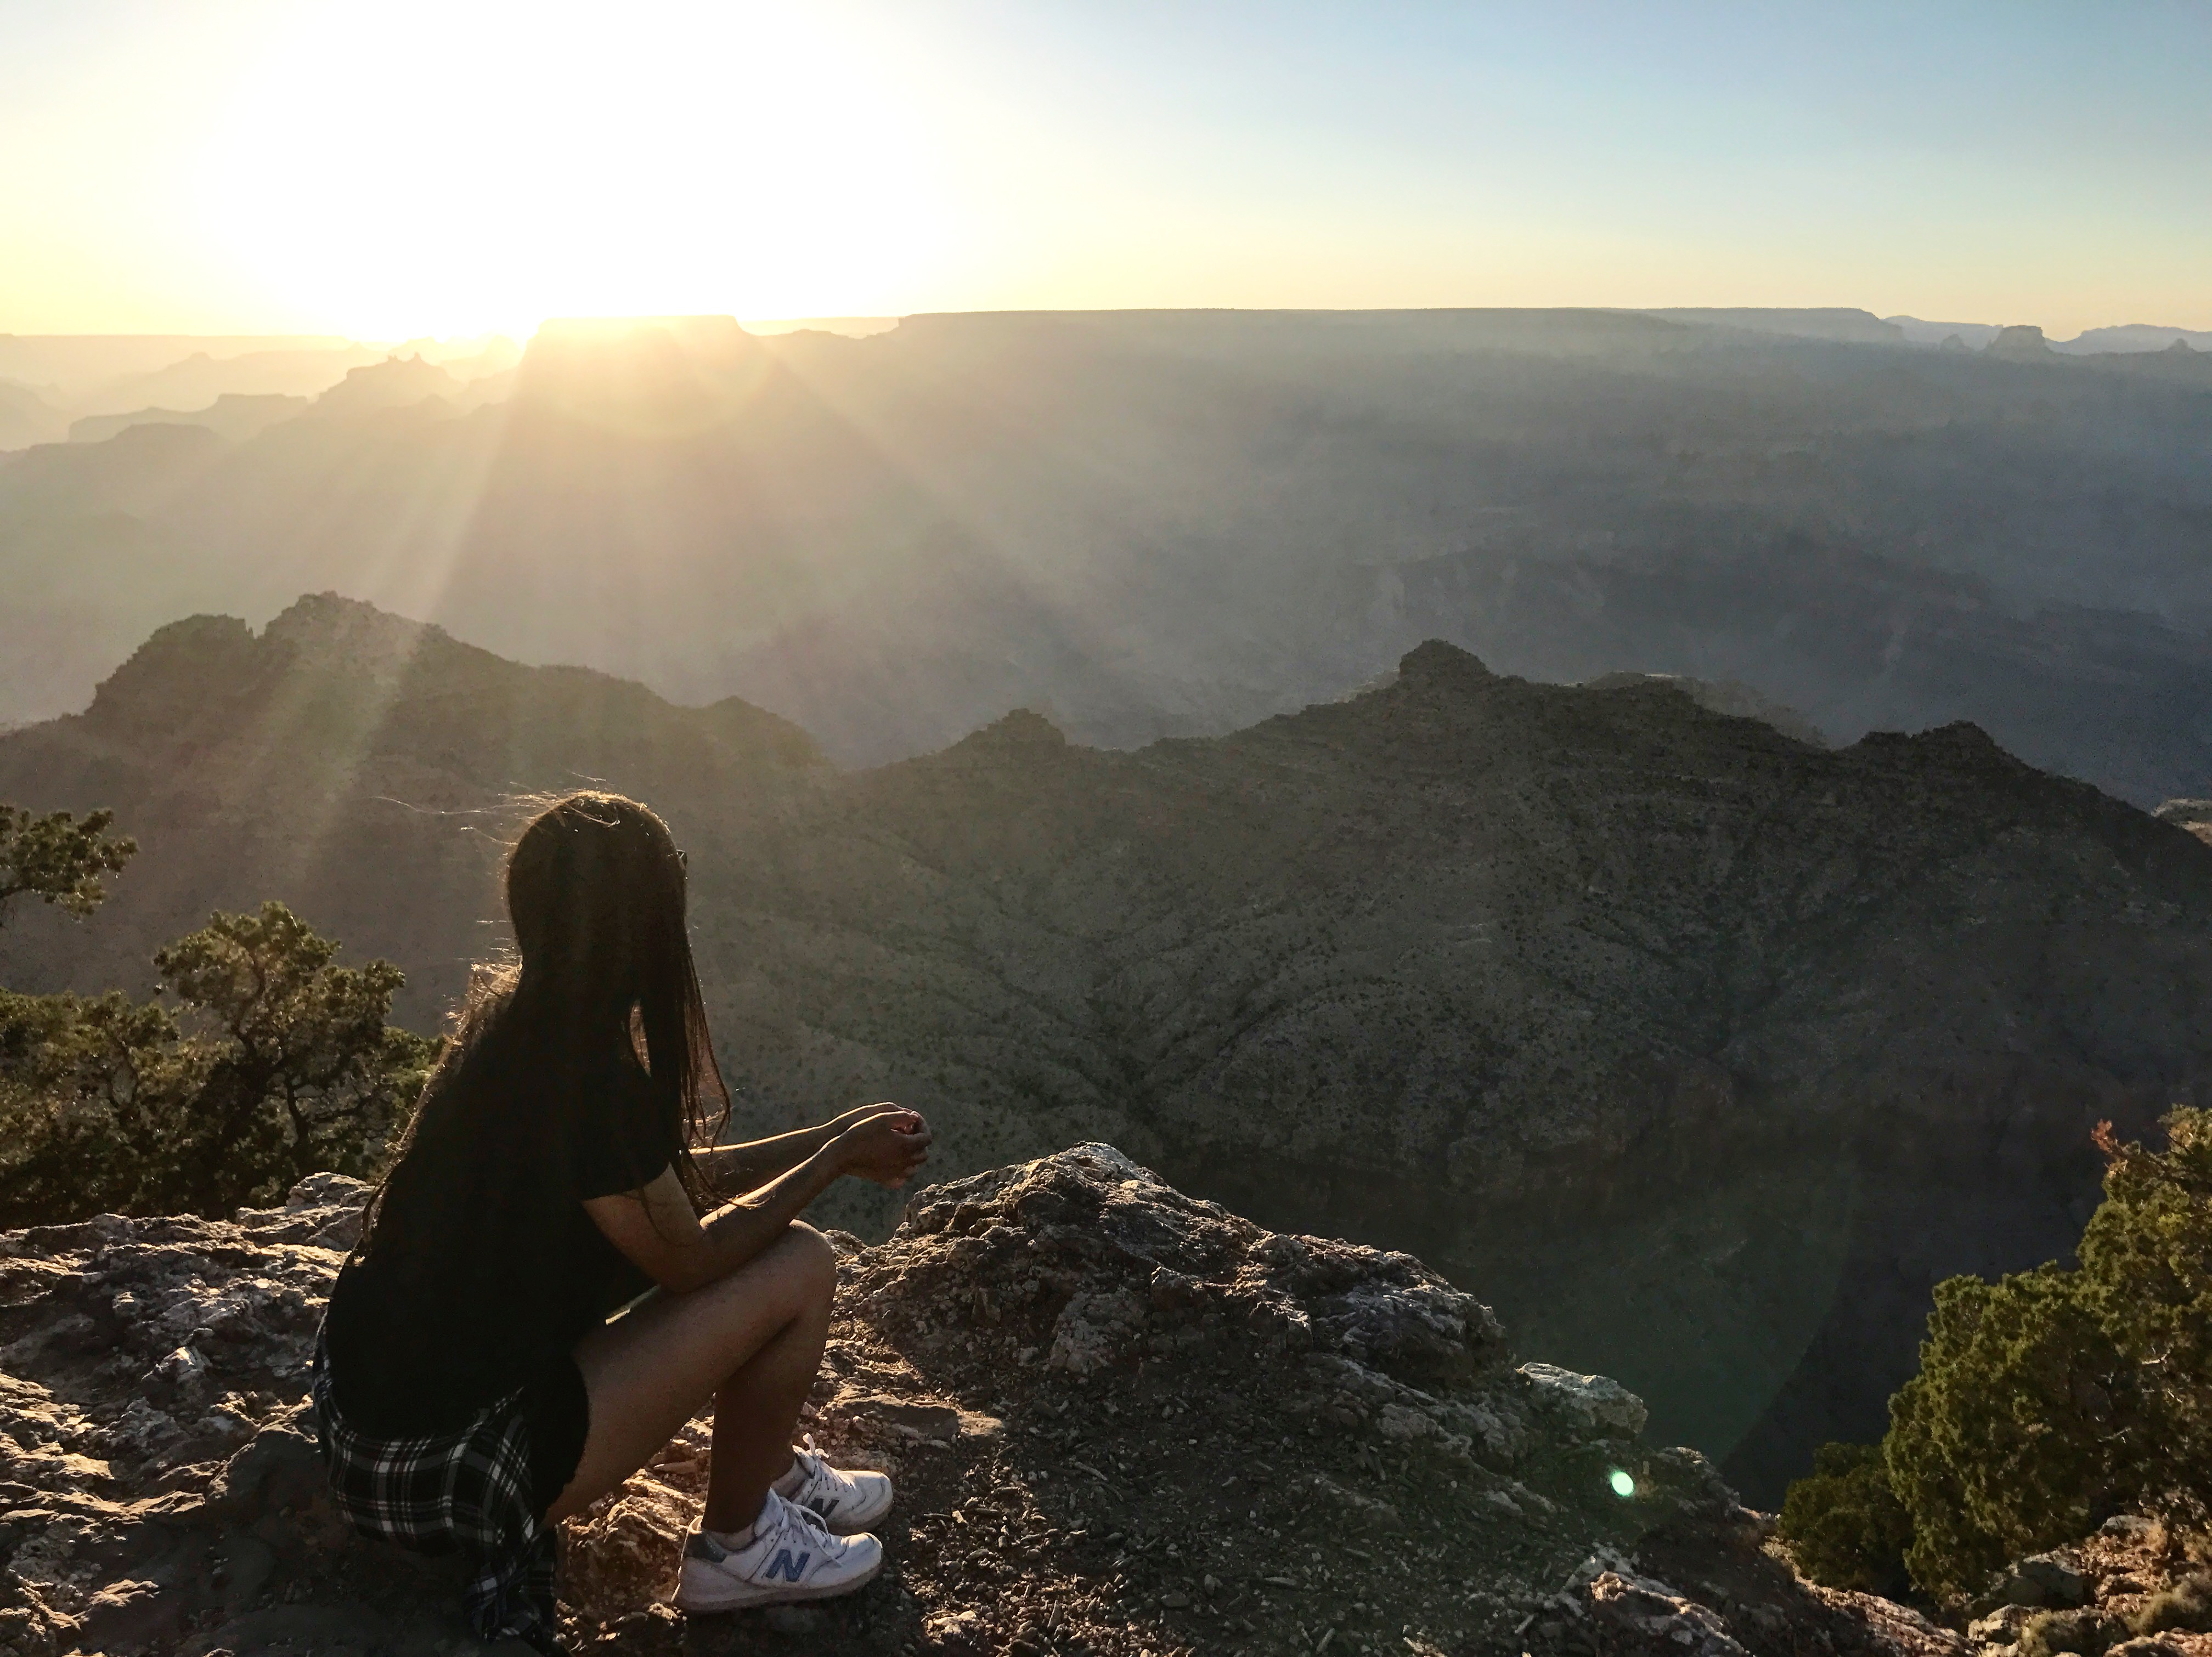 Mariana overlooking a beautiful sunrise at the edge of a mountain trail